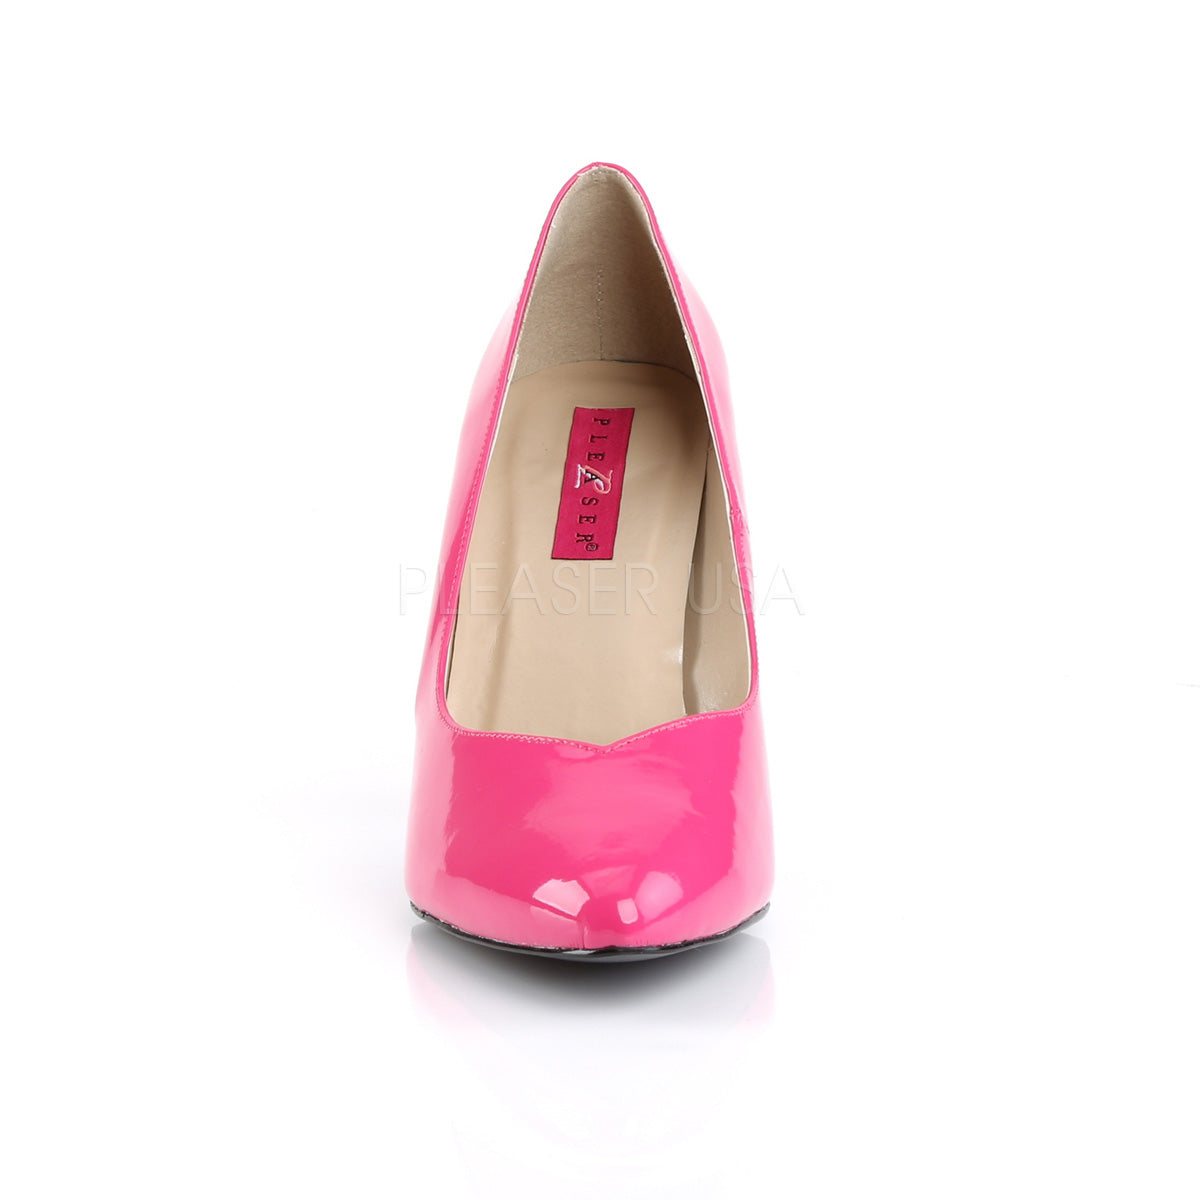 4 Inch Heel Hot Pink Pointed Toe Pump Drag Queen Shoes | DREAM-420 ...